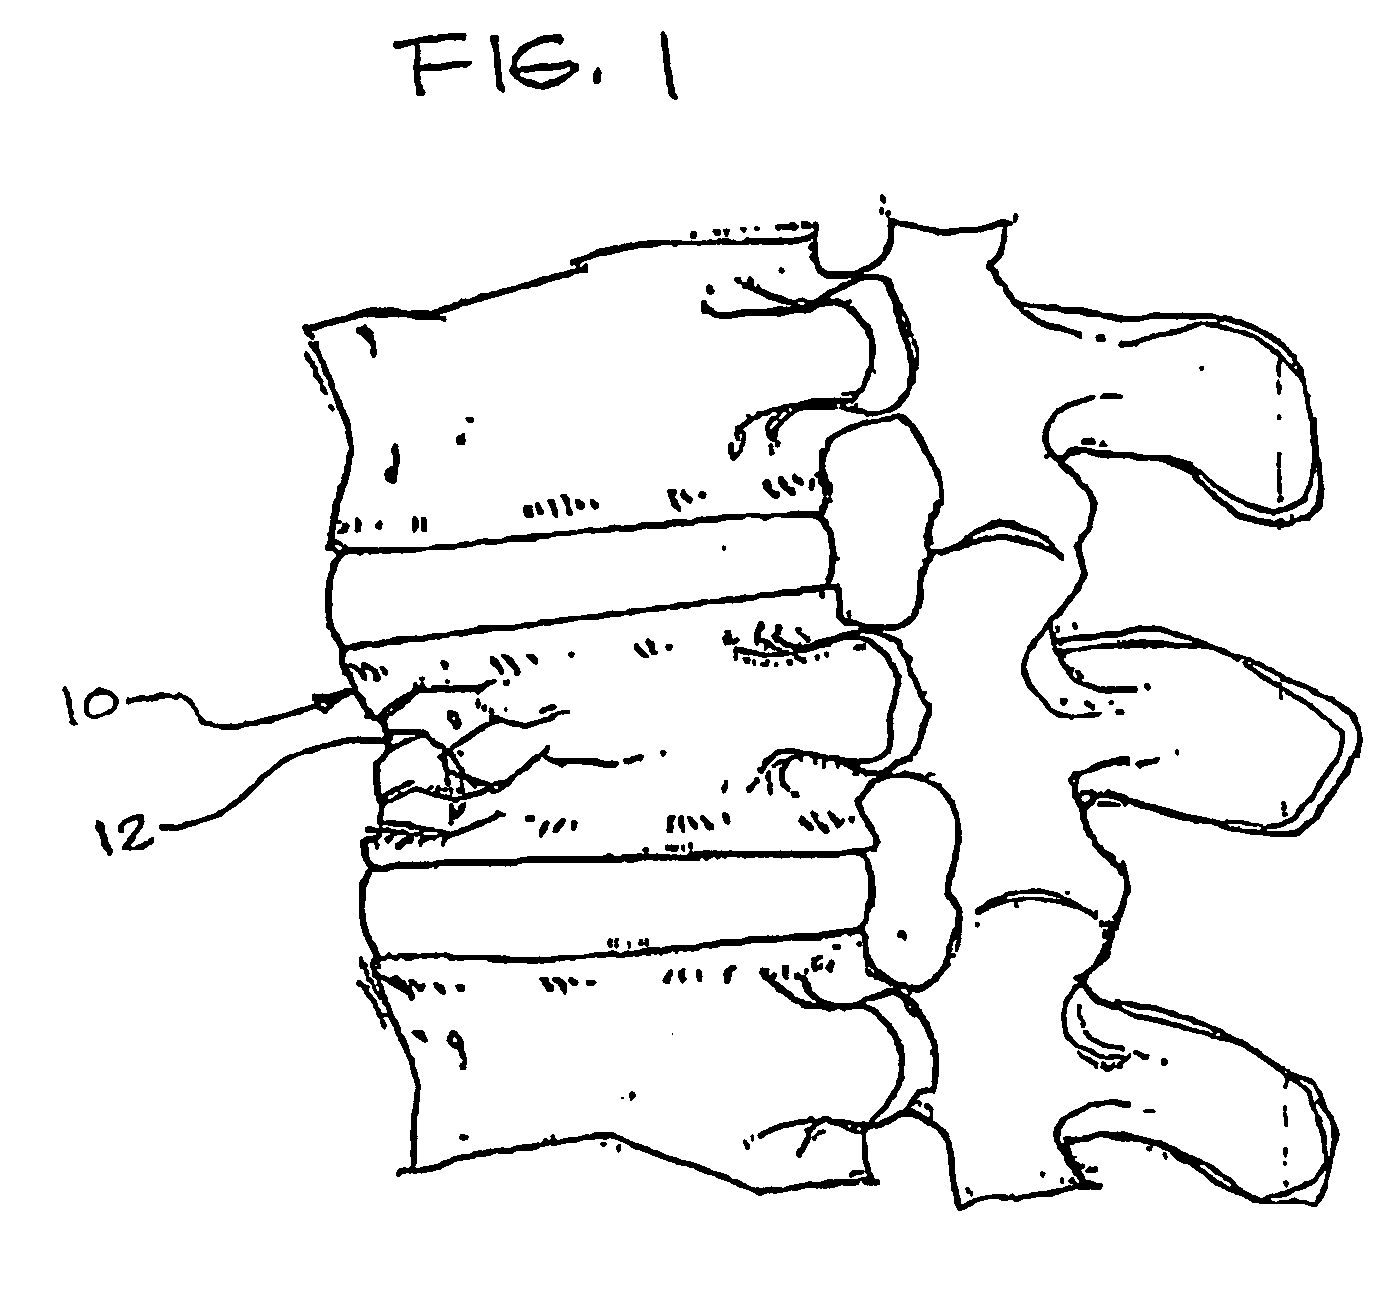 Expandable porous mesh bag device and methods of use for reduction, filling, fixation and supporting of bone